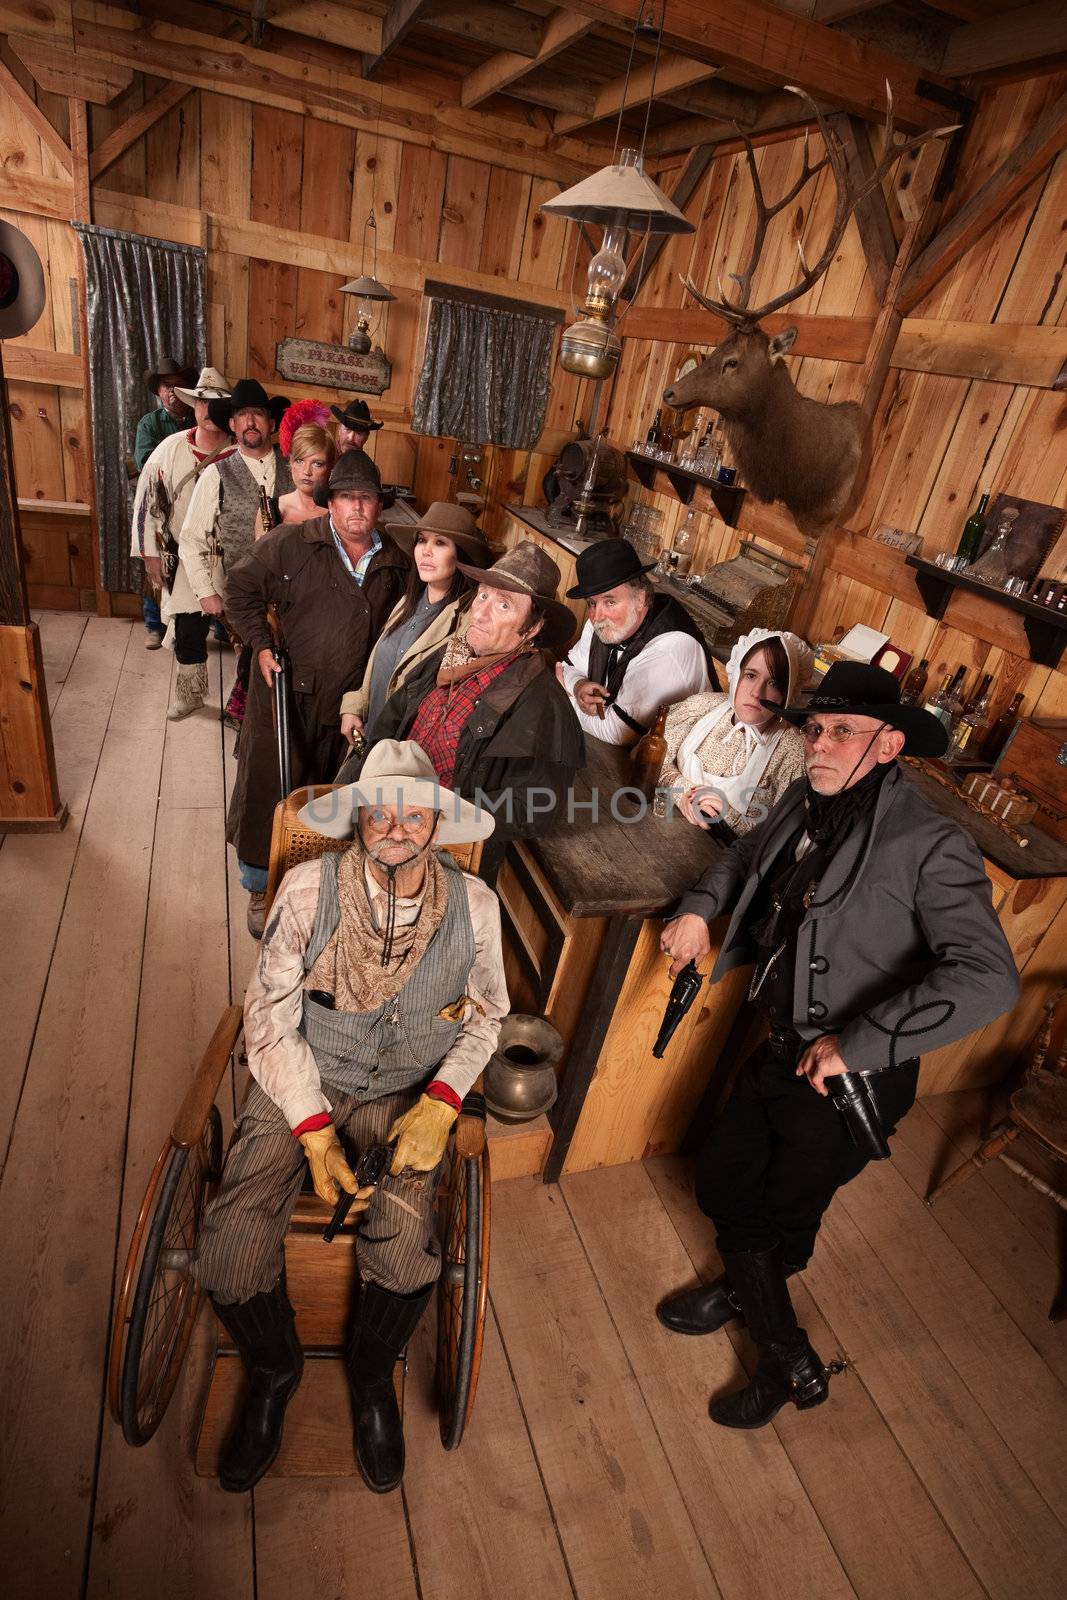 Relaxed customers in old west tavern with weapons at their sides